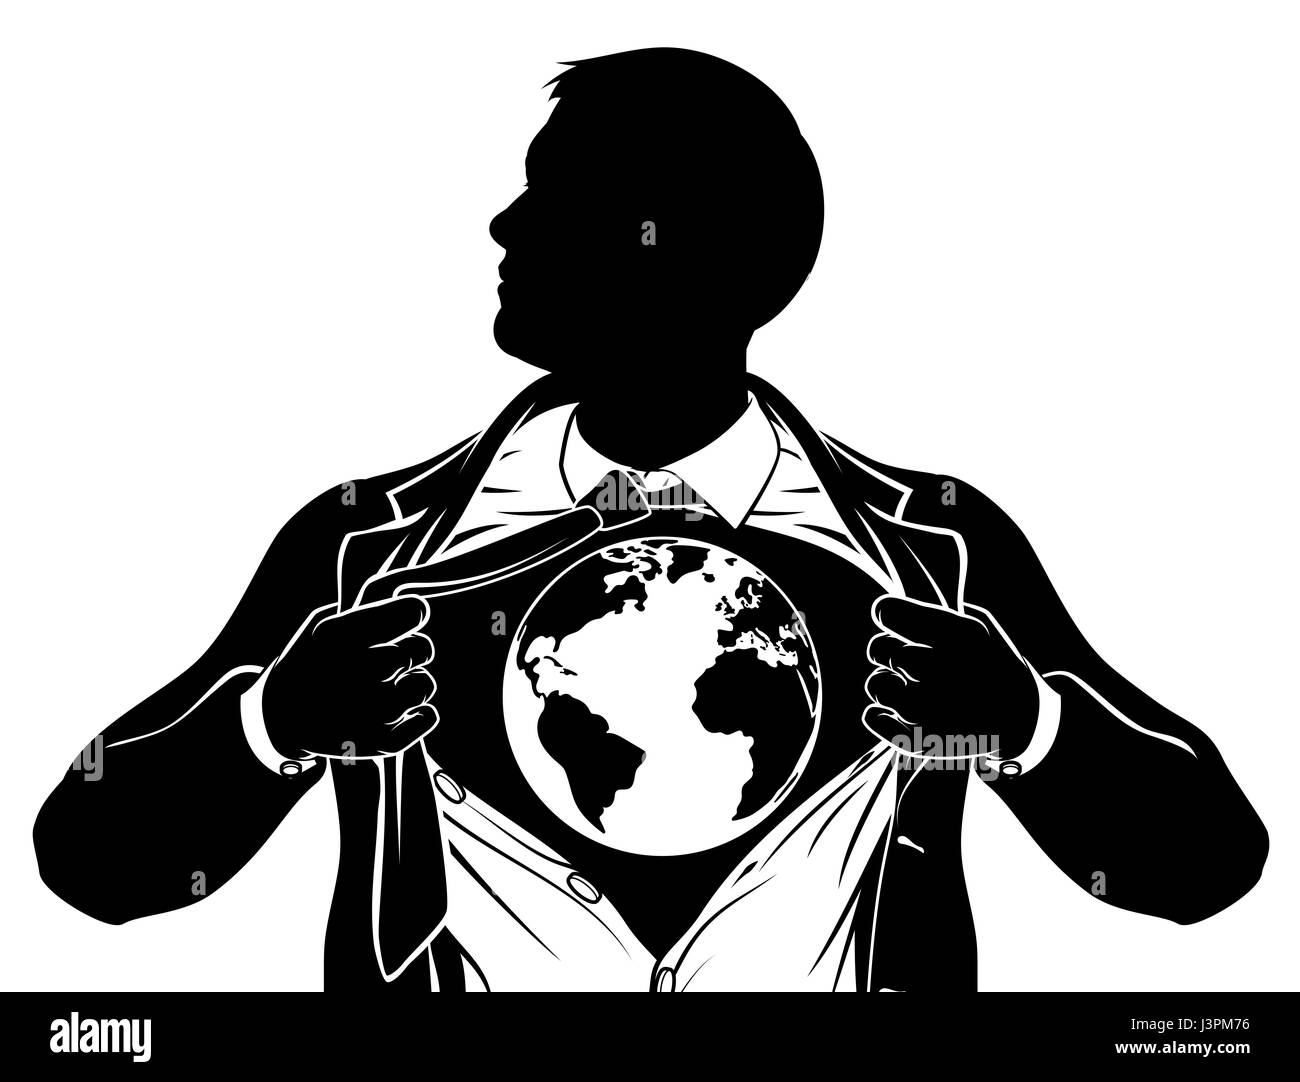 A superhero business man tearing his shirt showing the chest of his costume underneath with a world earth globe. Stock Photo